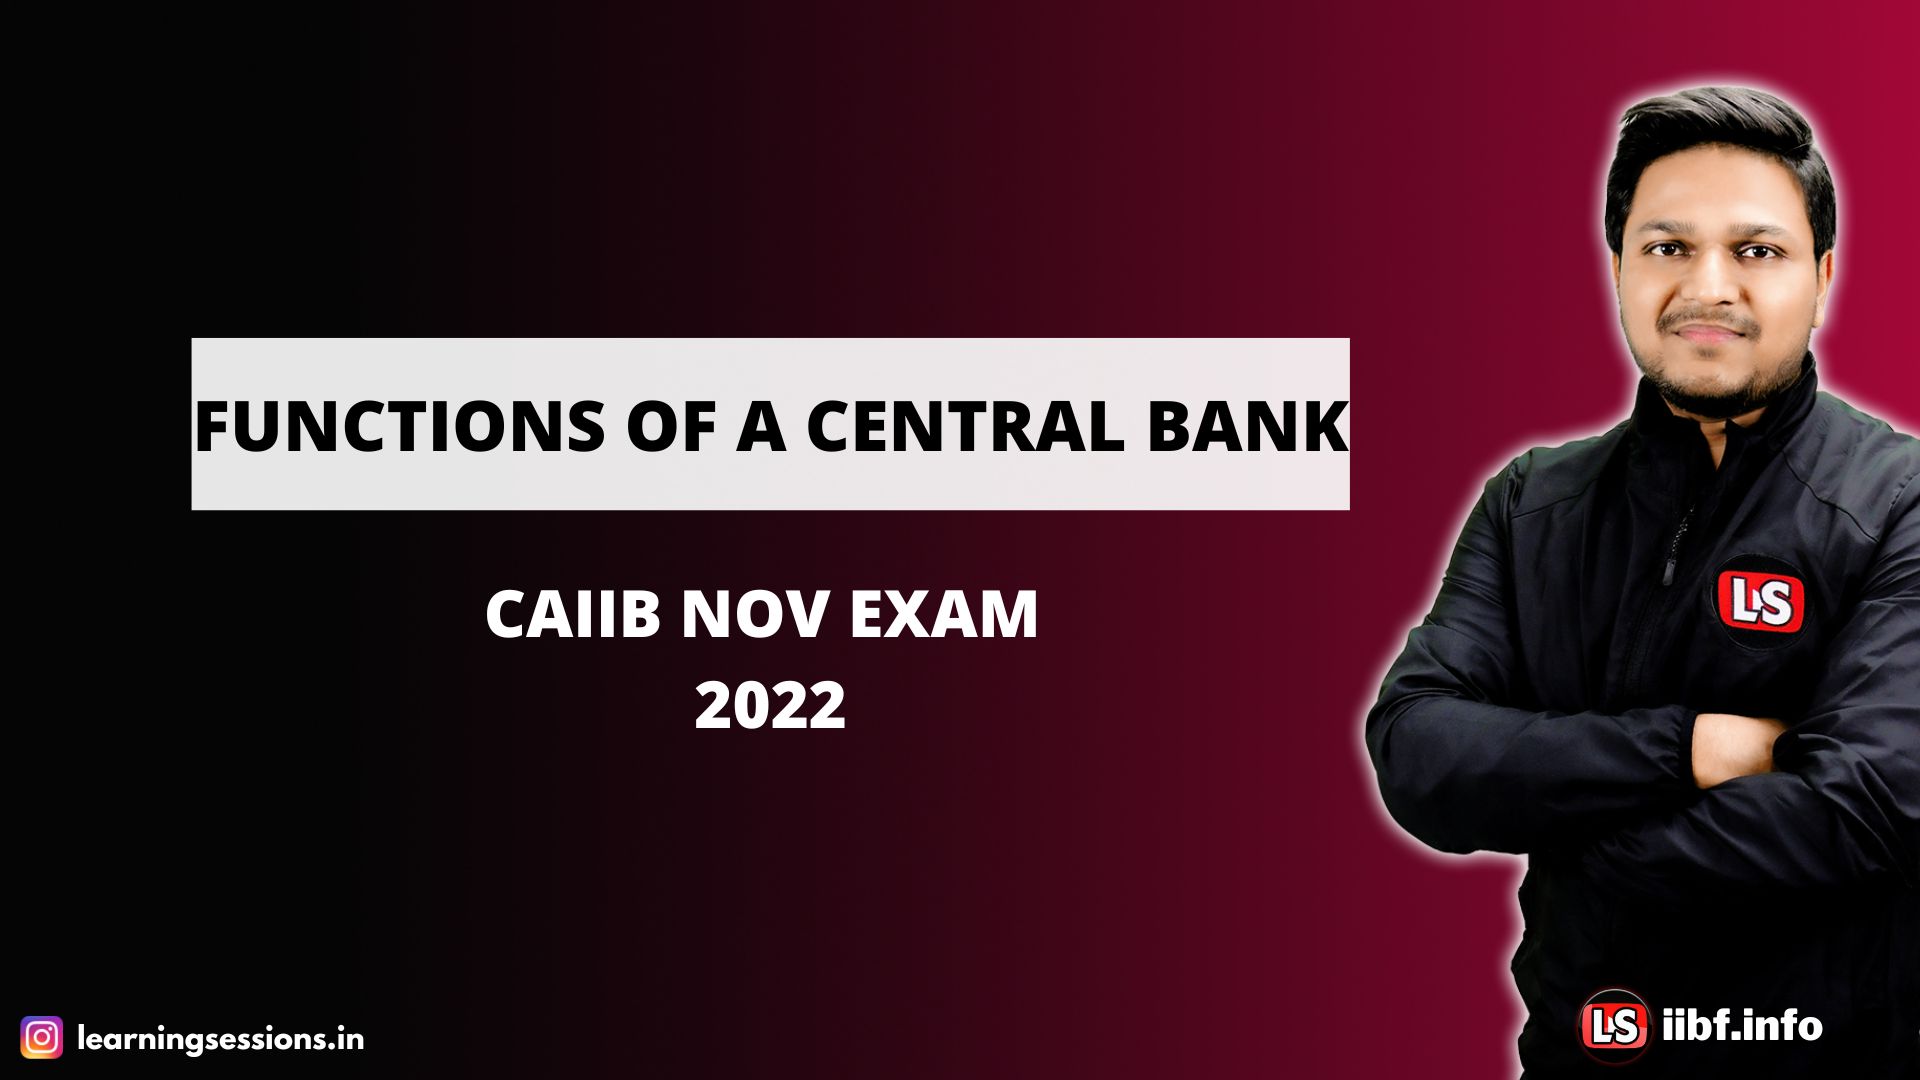 FUNCTIONS OF A CENTRAL BANK | CAIIB NOV EXAM 2022